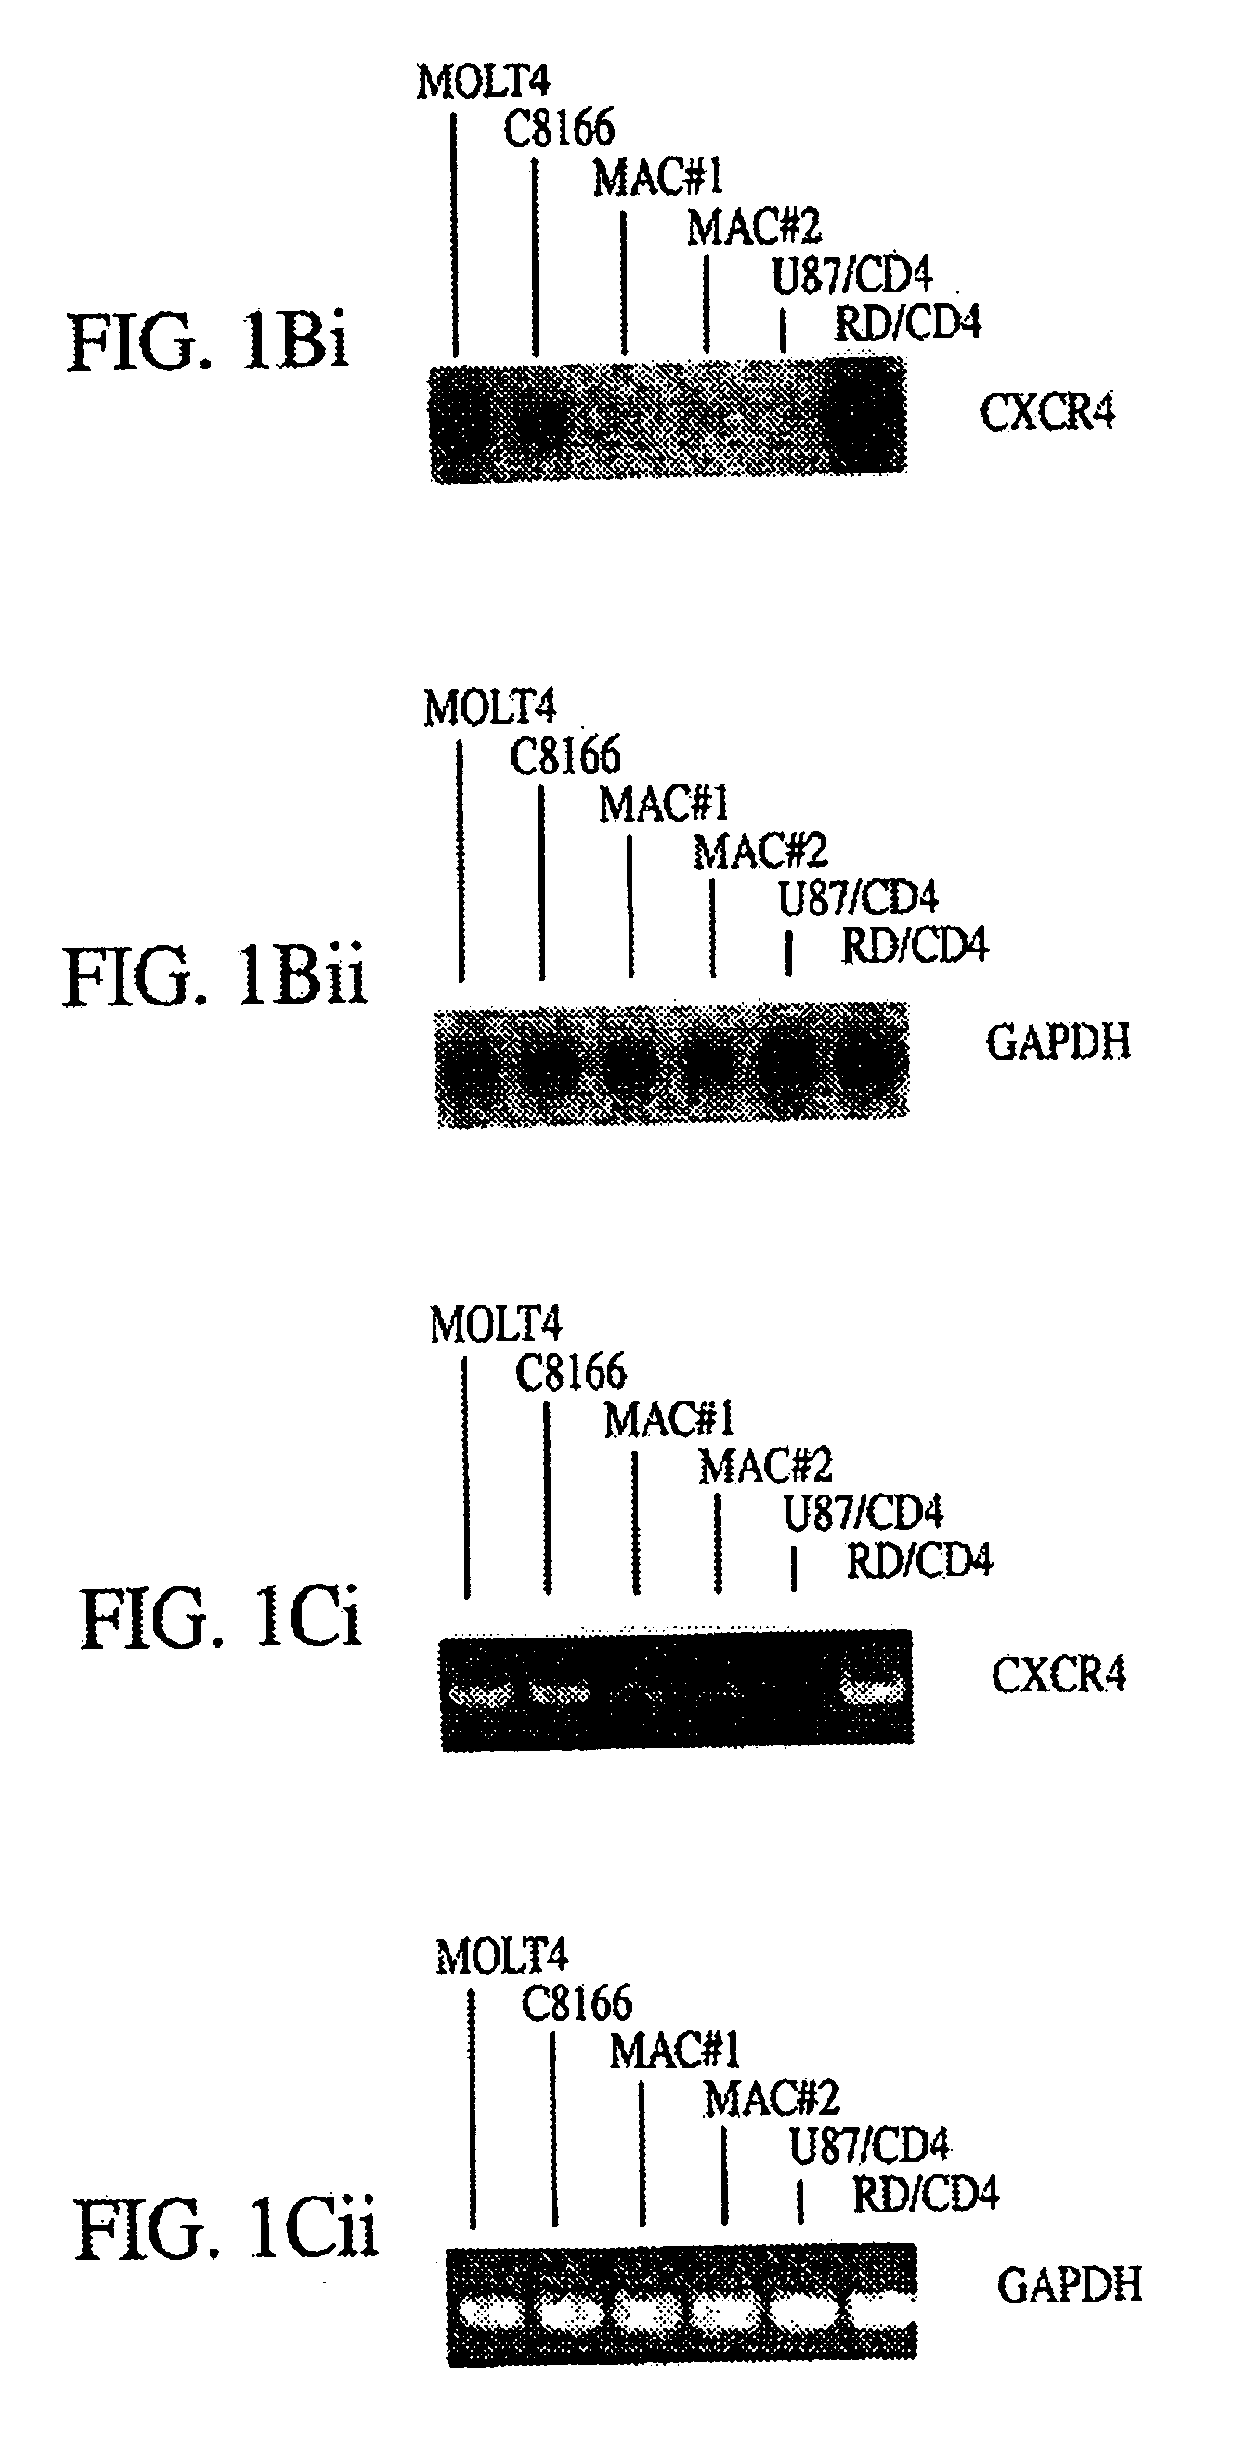 Antibodies directed against cellular coreceptors for human immunodeficiency virus and methods of using the same